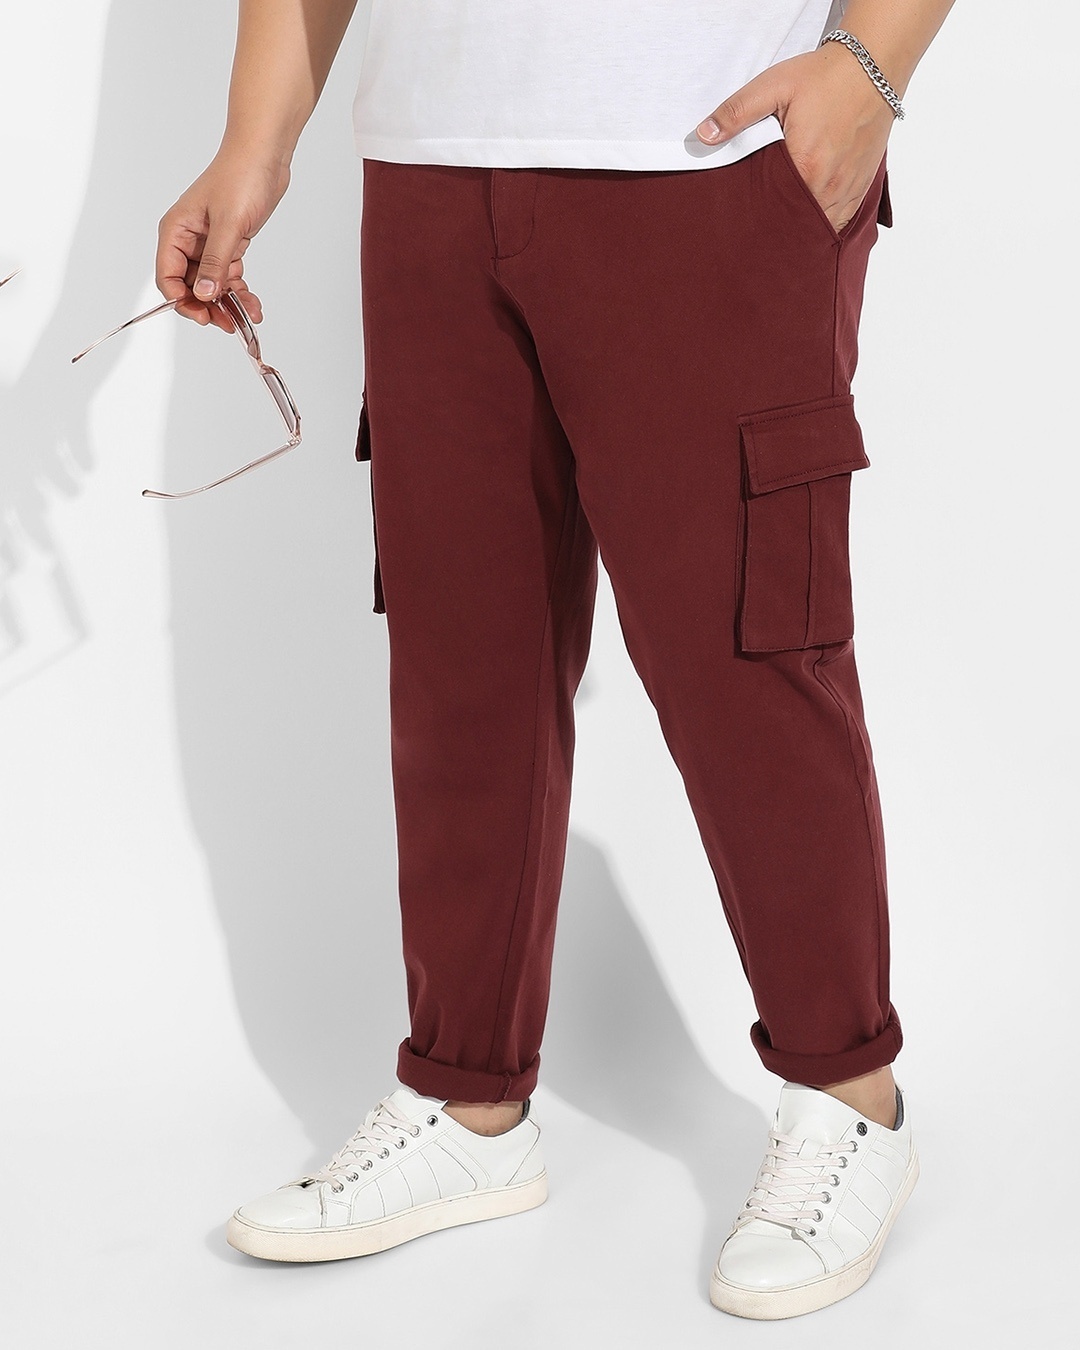 COLLUSION Plus cargo trouser co ord with top stitching in blue  ASOS